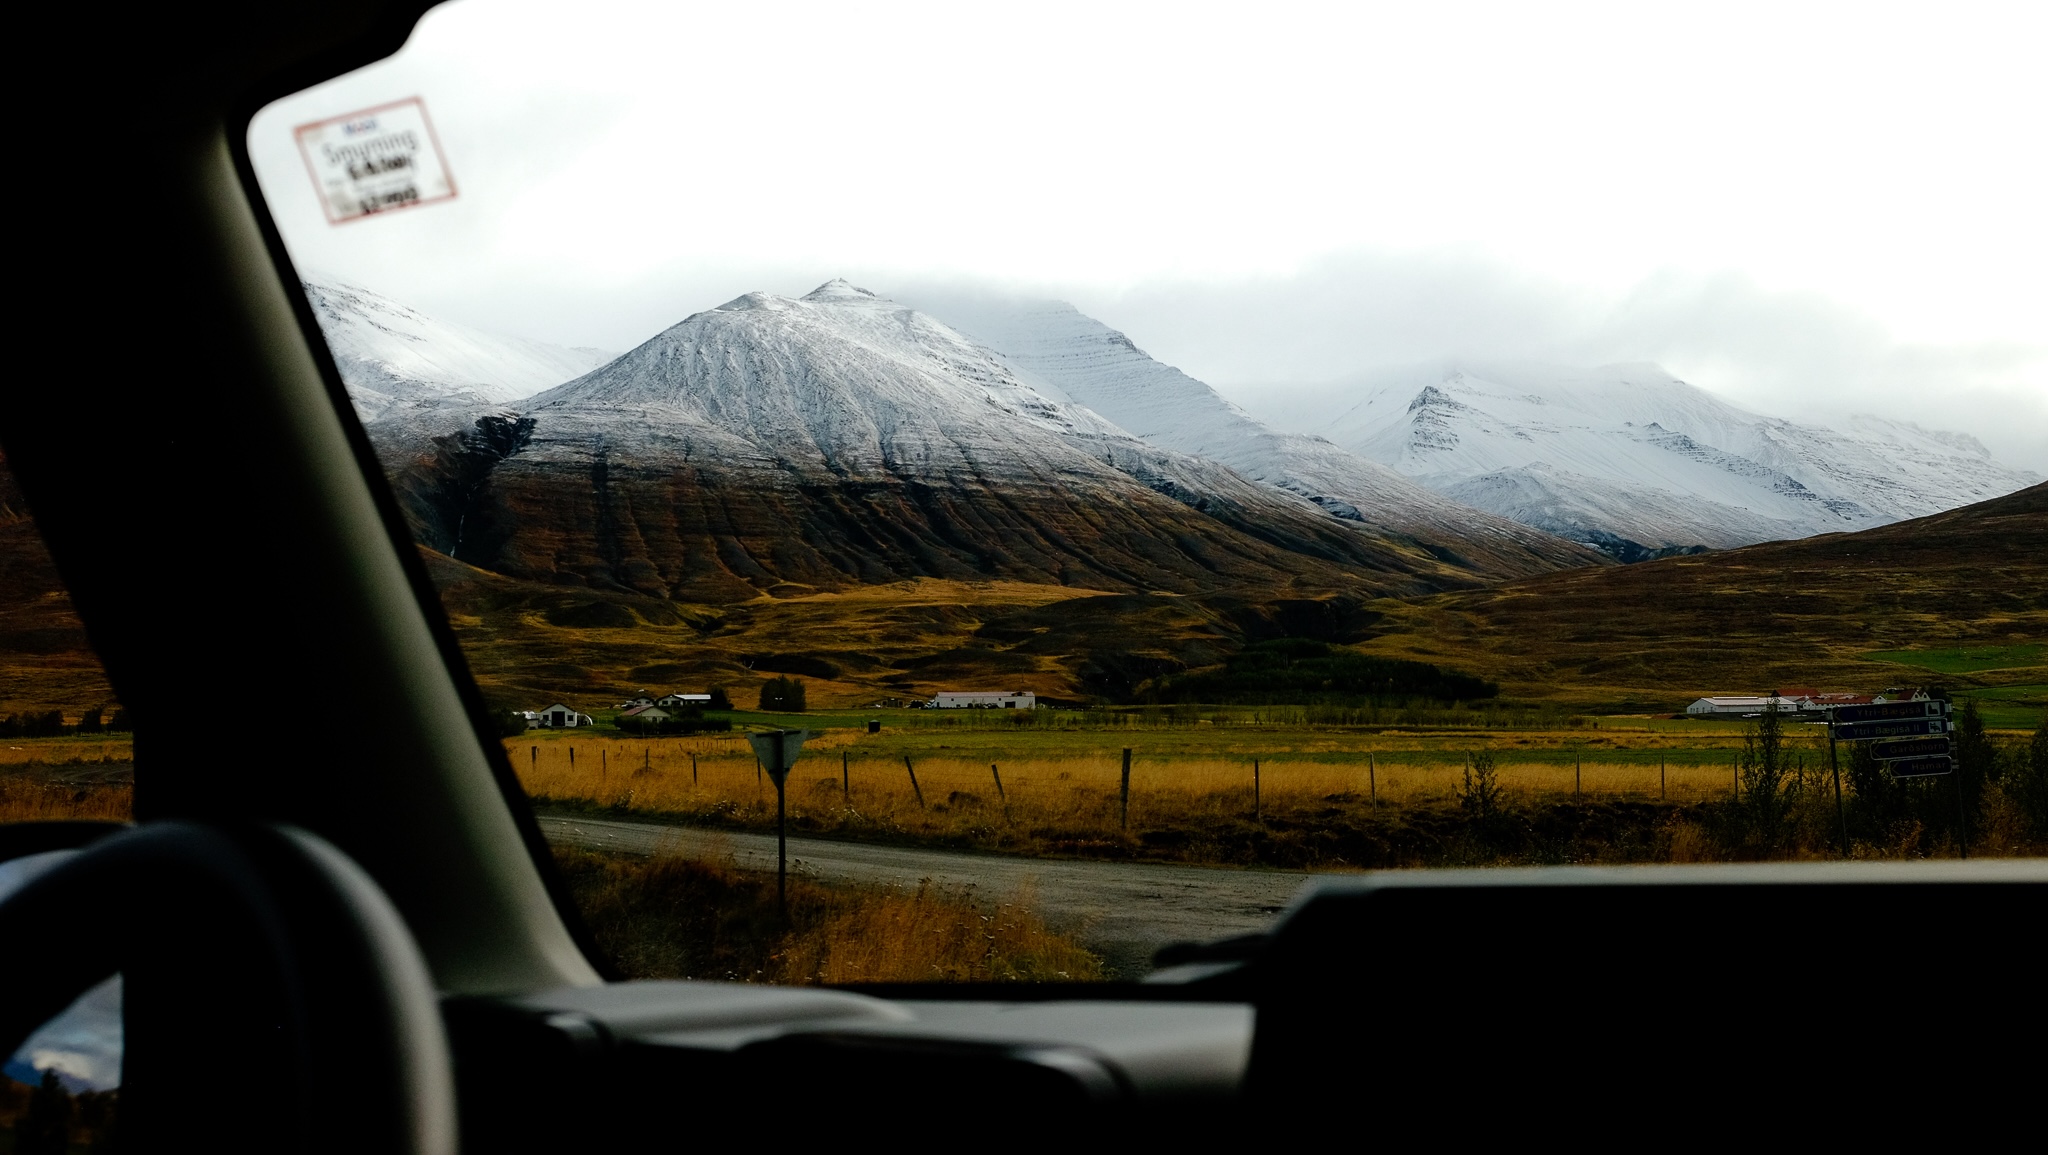 From the window of a car with the dashboard in the foreground you see a yellow landscape transition to a snowy mountain fade into a white sky